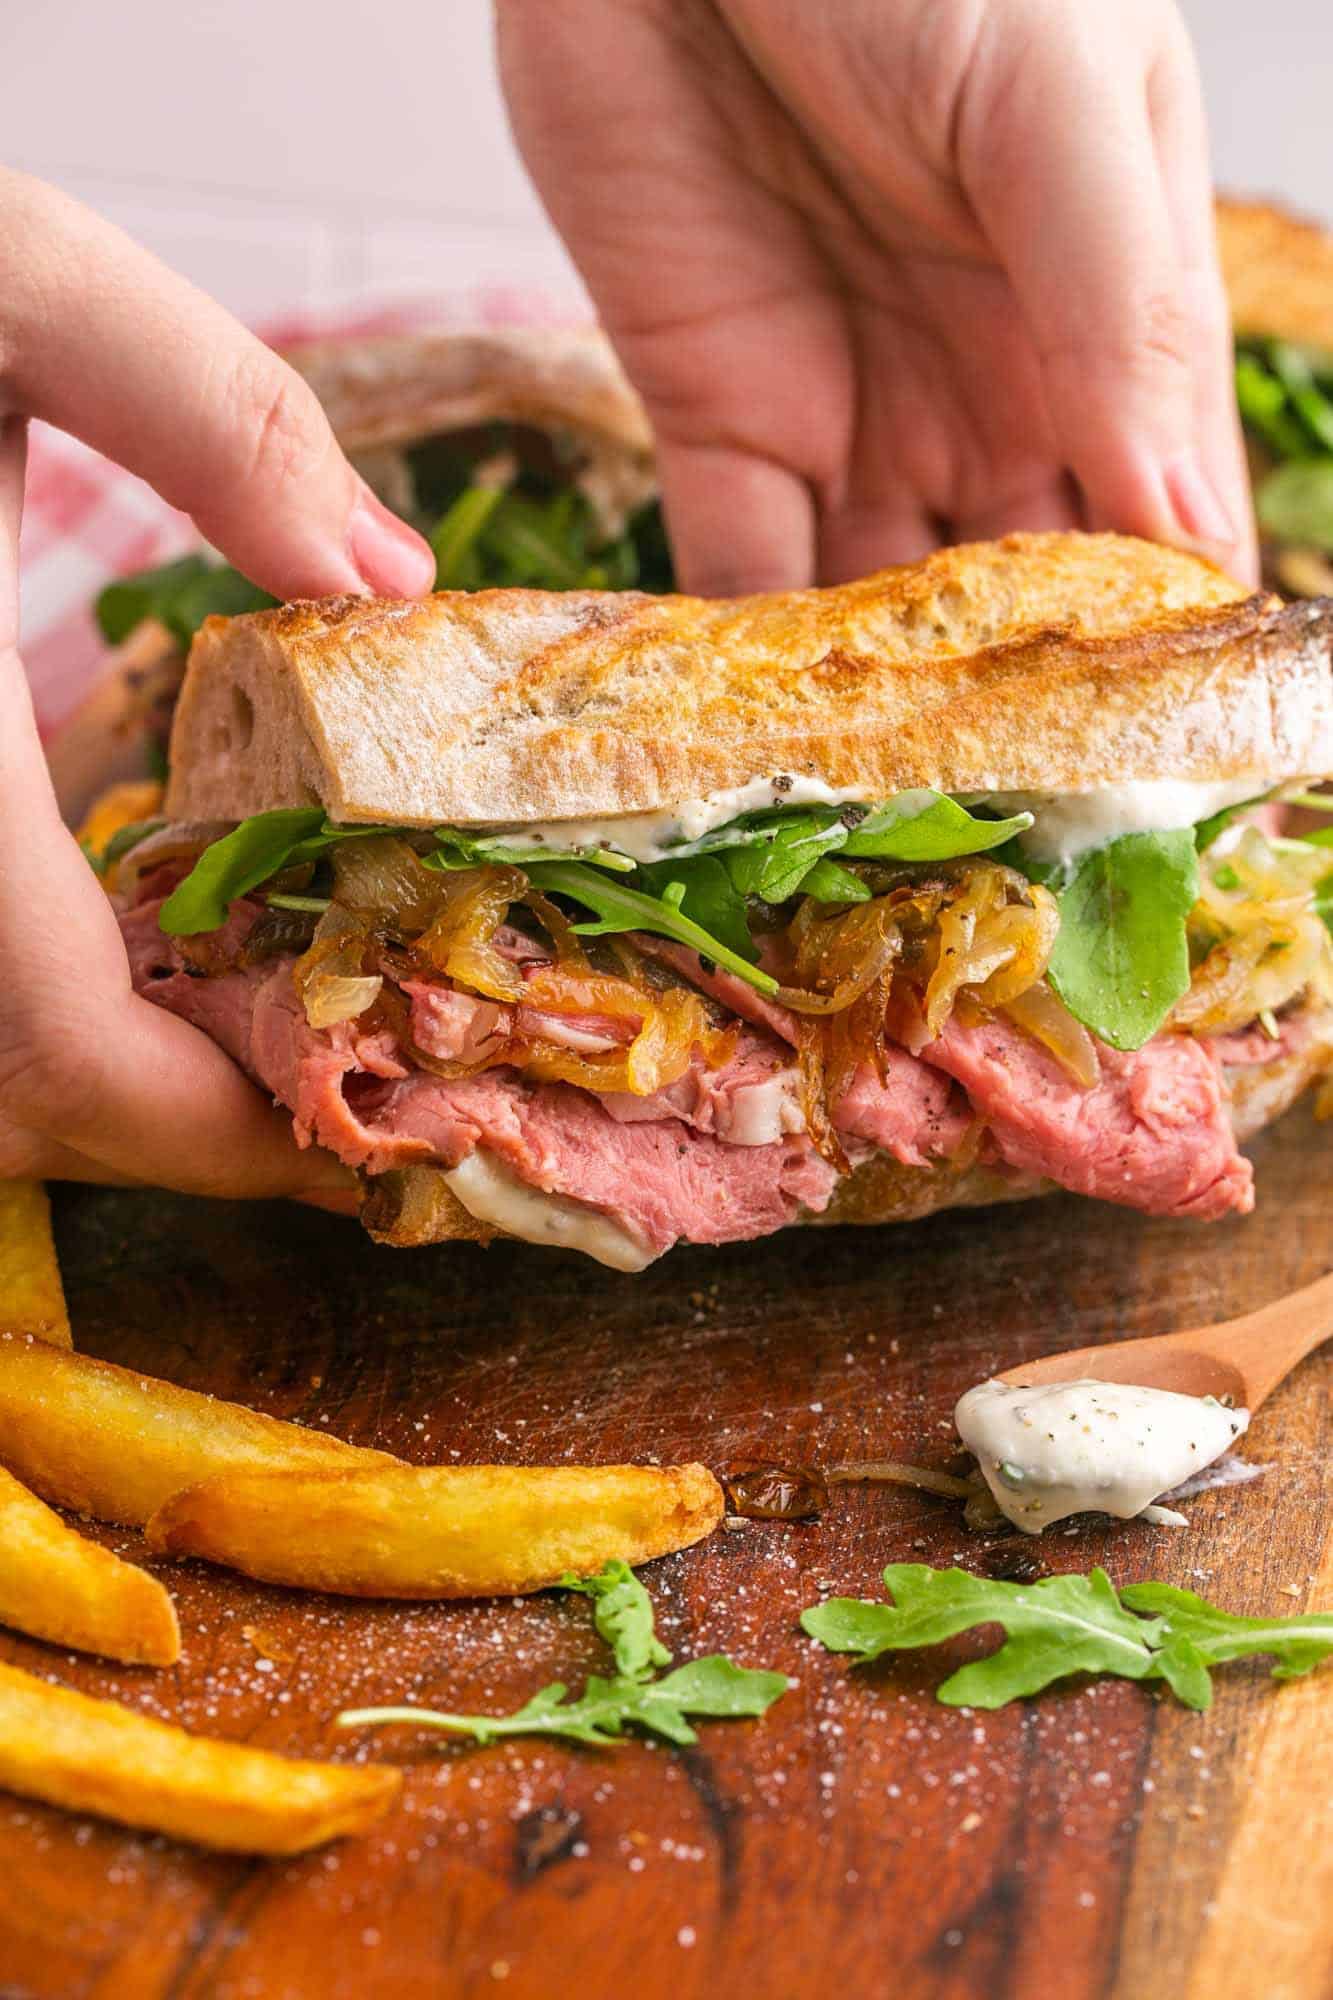 two hands are picking up a prime rib sandwich from a wooden cutting board.